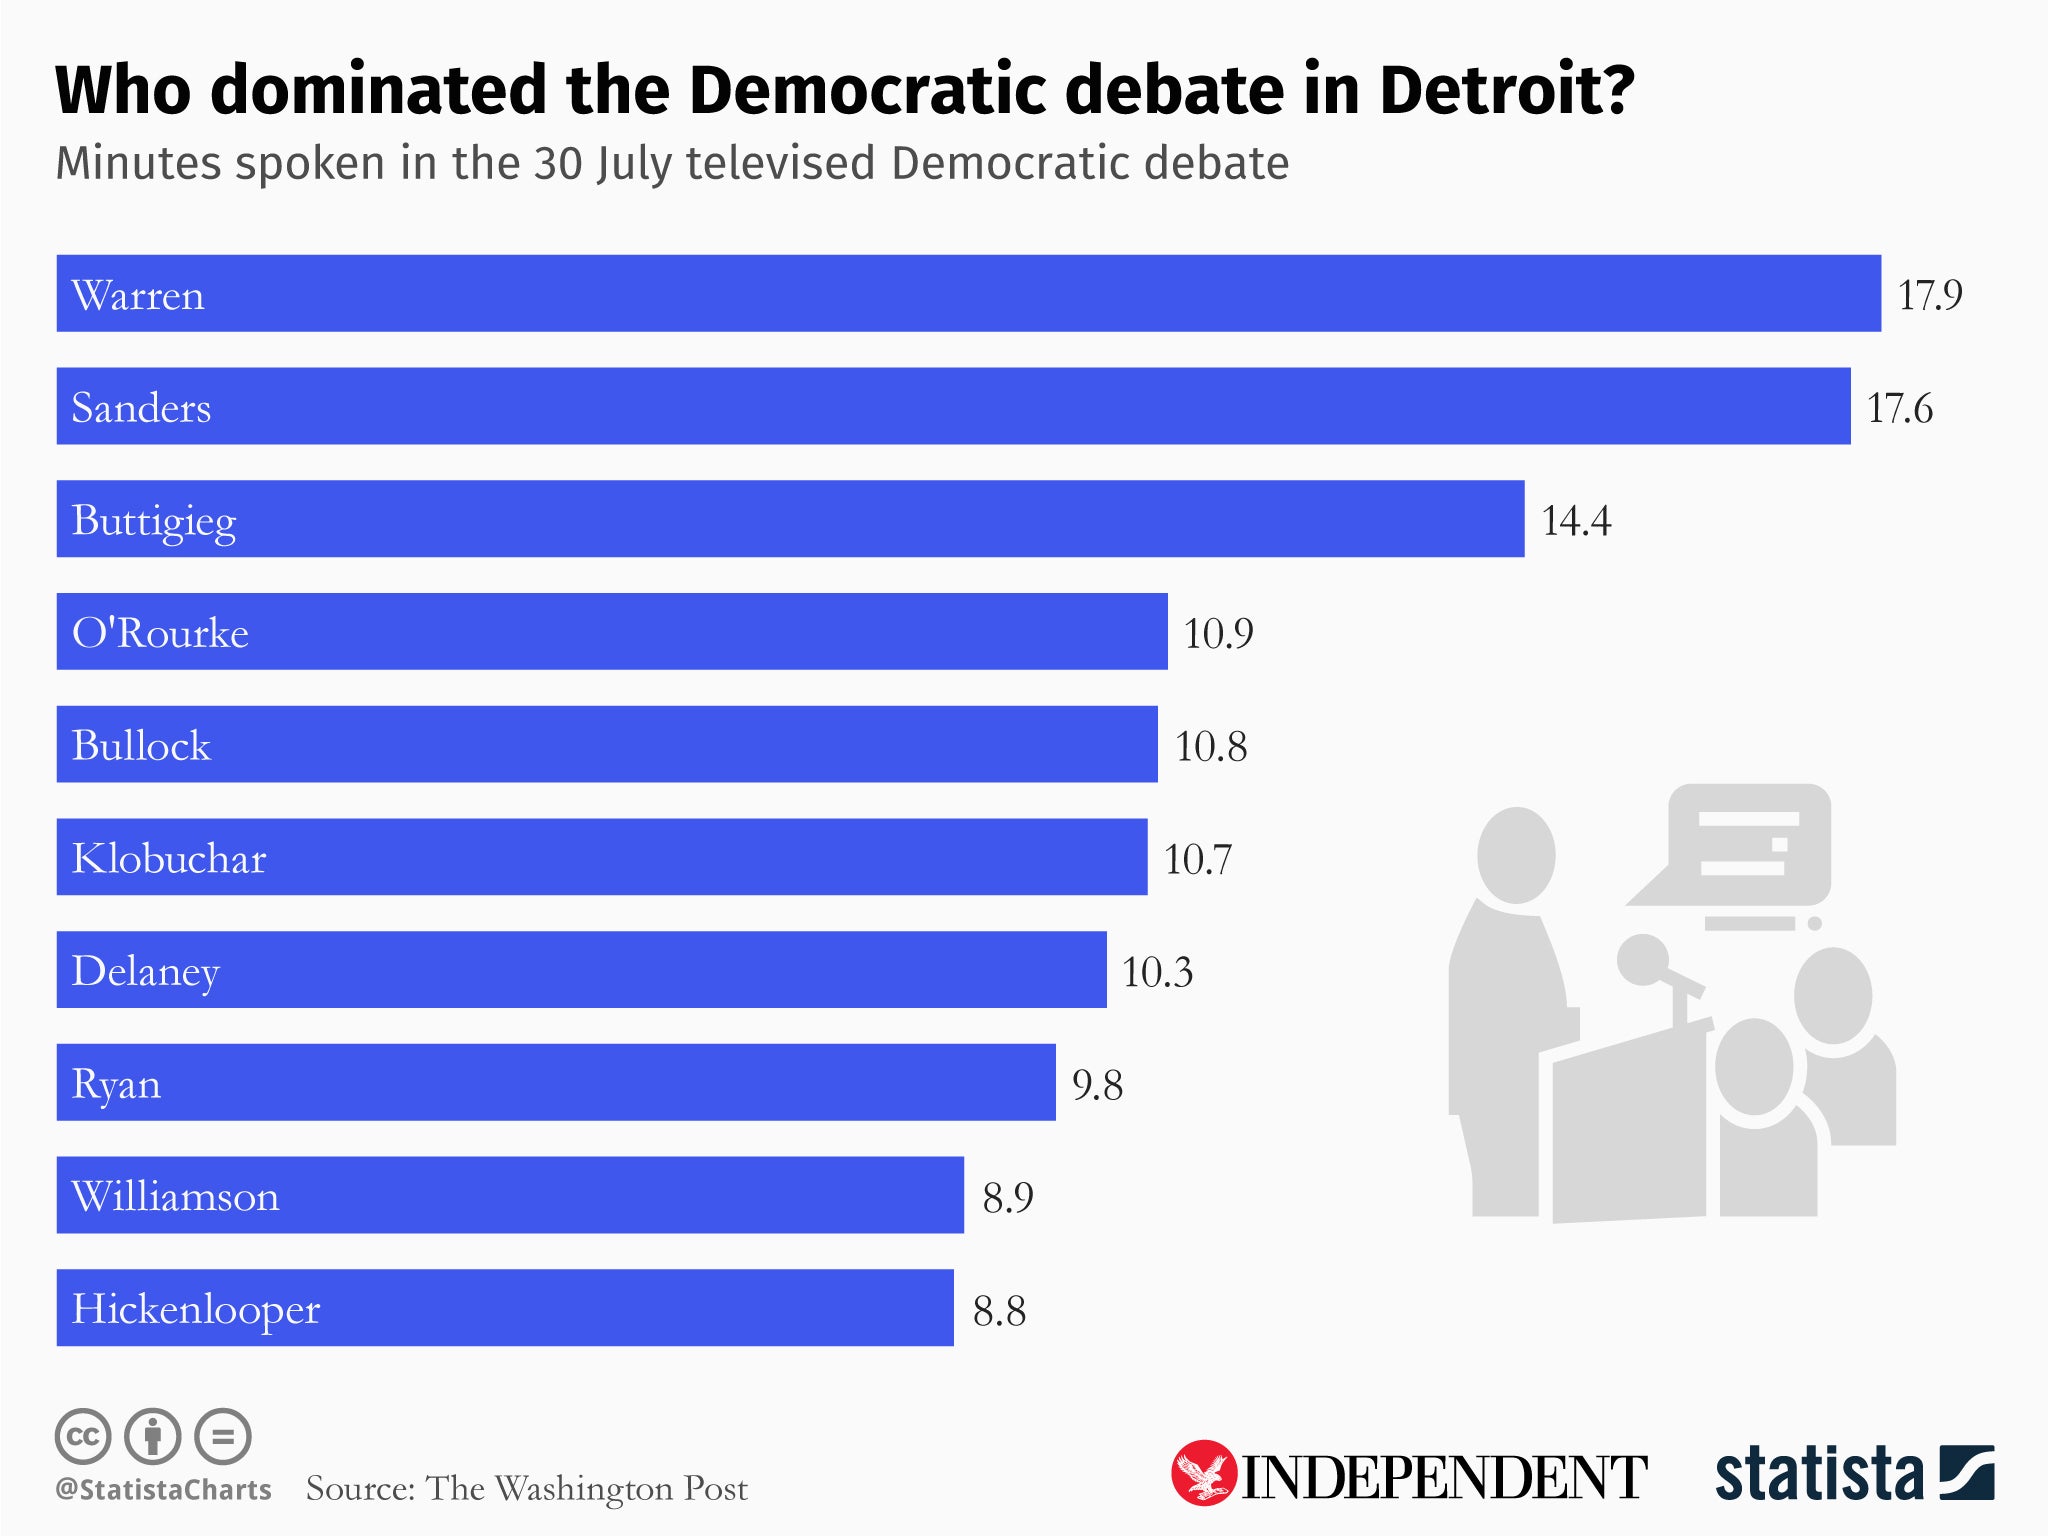 Democratic candidates who got the most speaking time during the debate